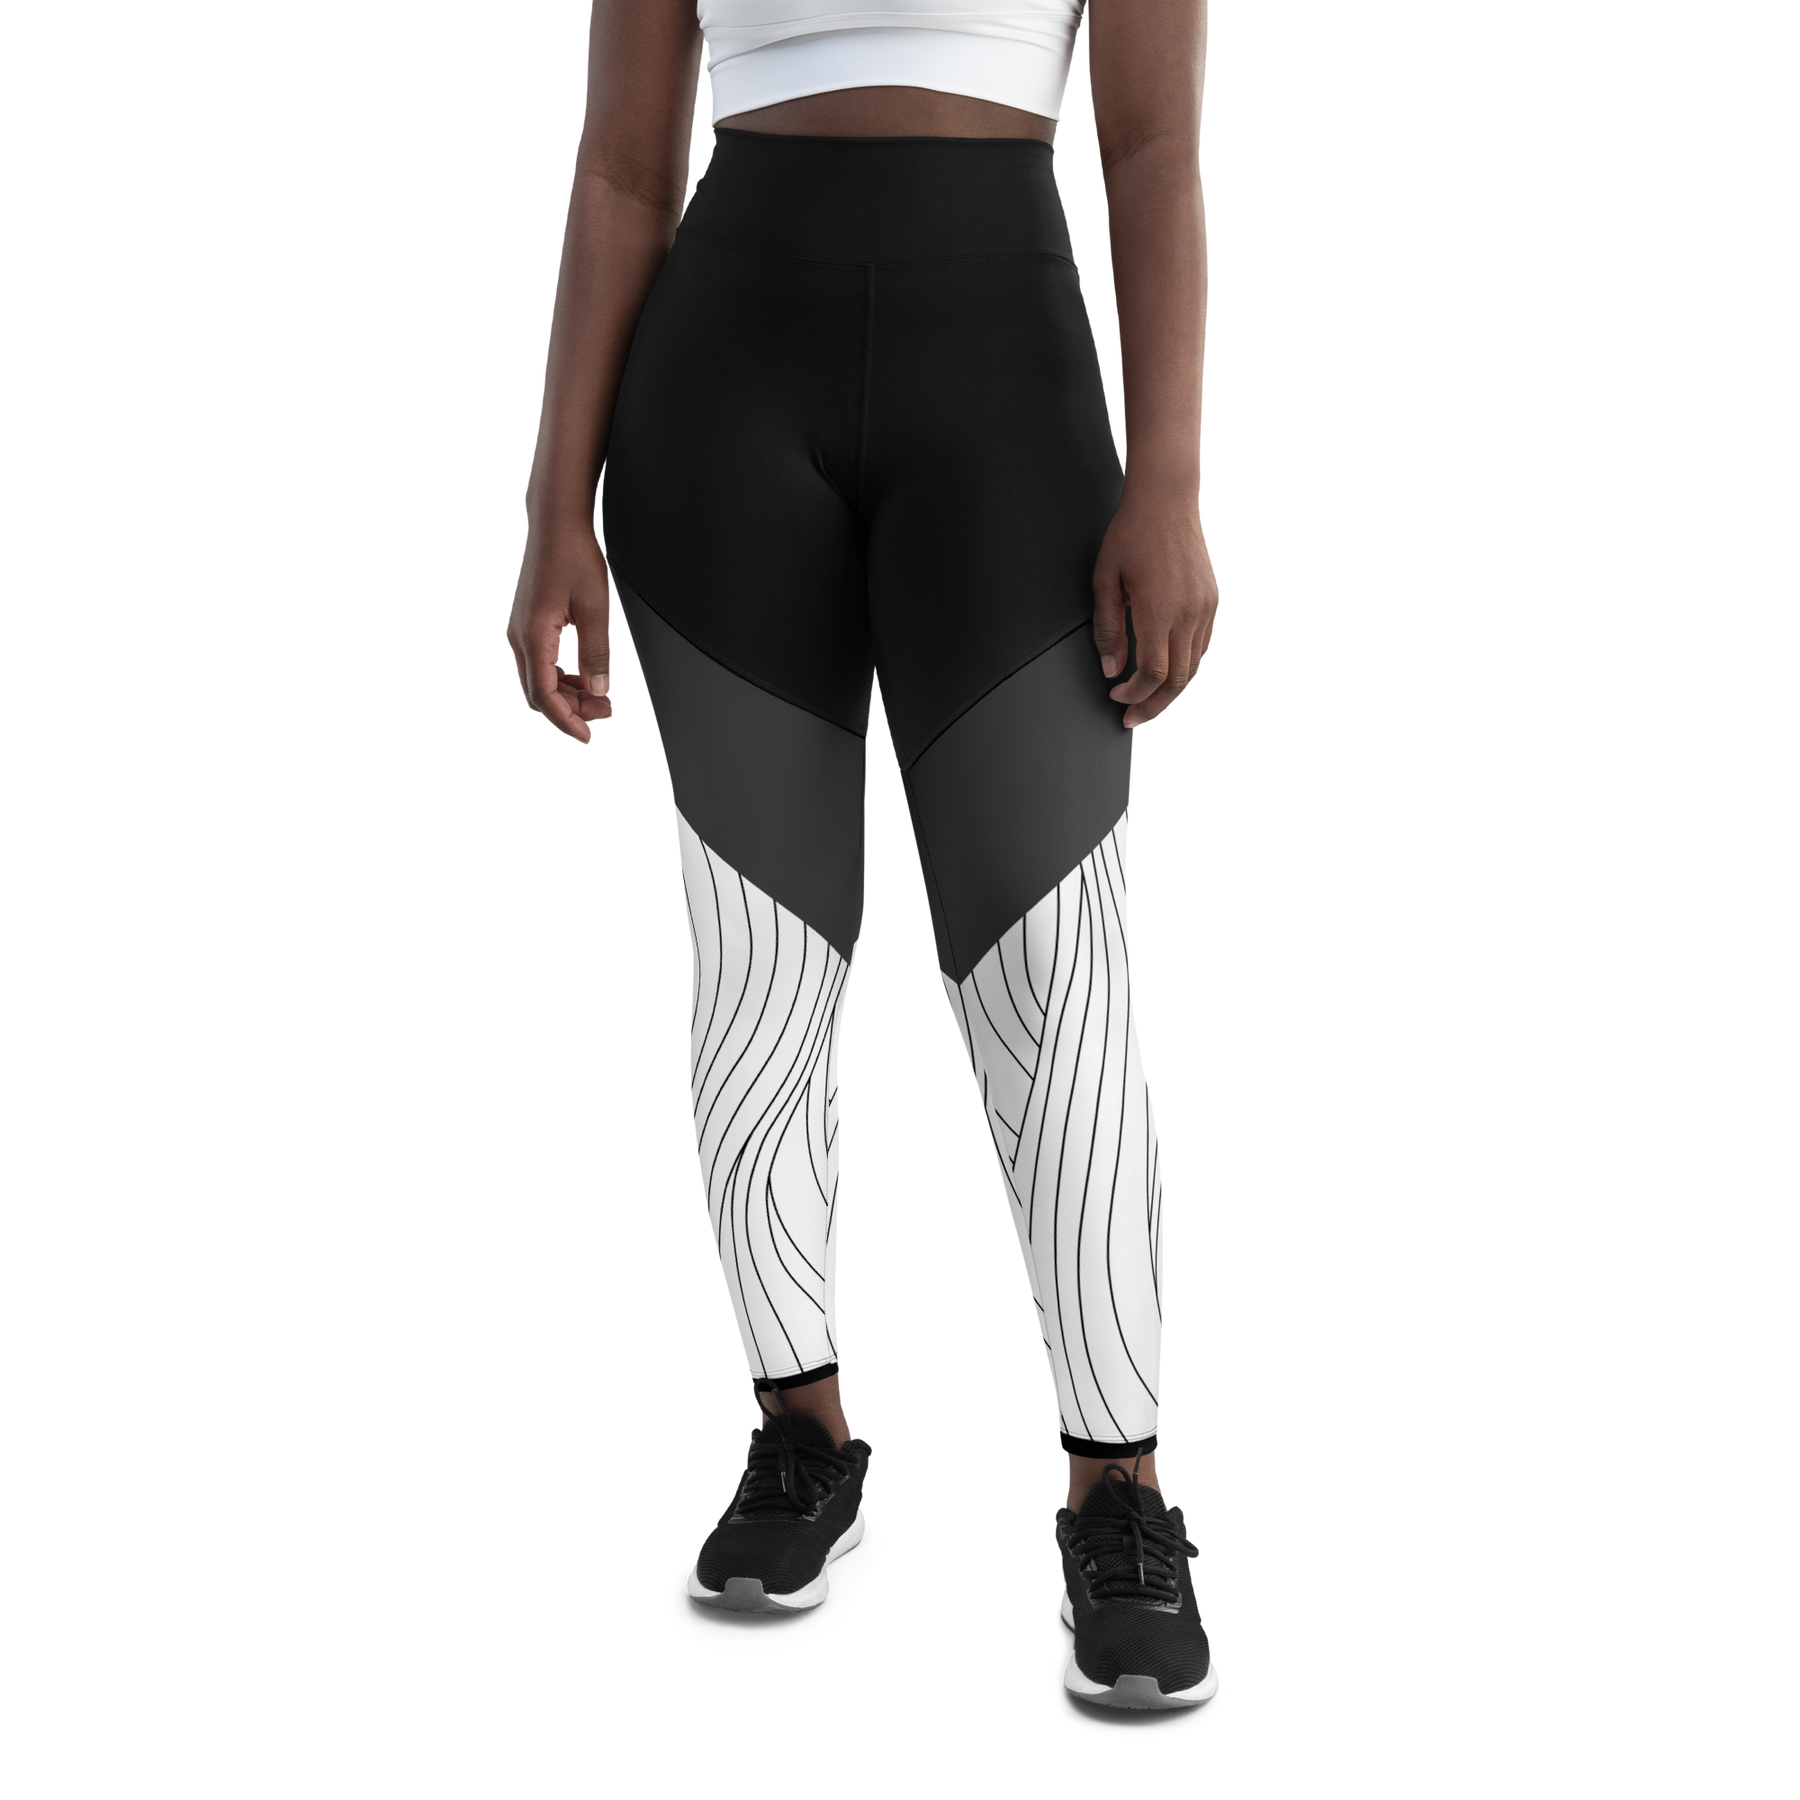 Lined Compression Leggings, Workout Clothes For Women